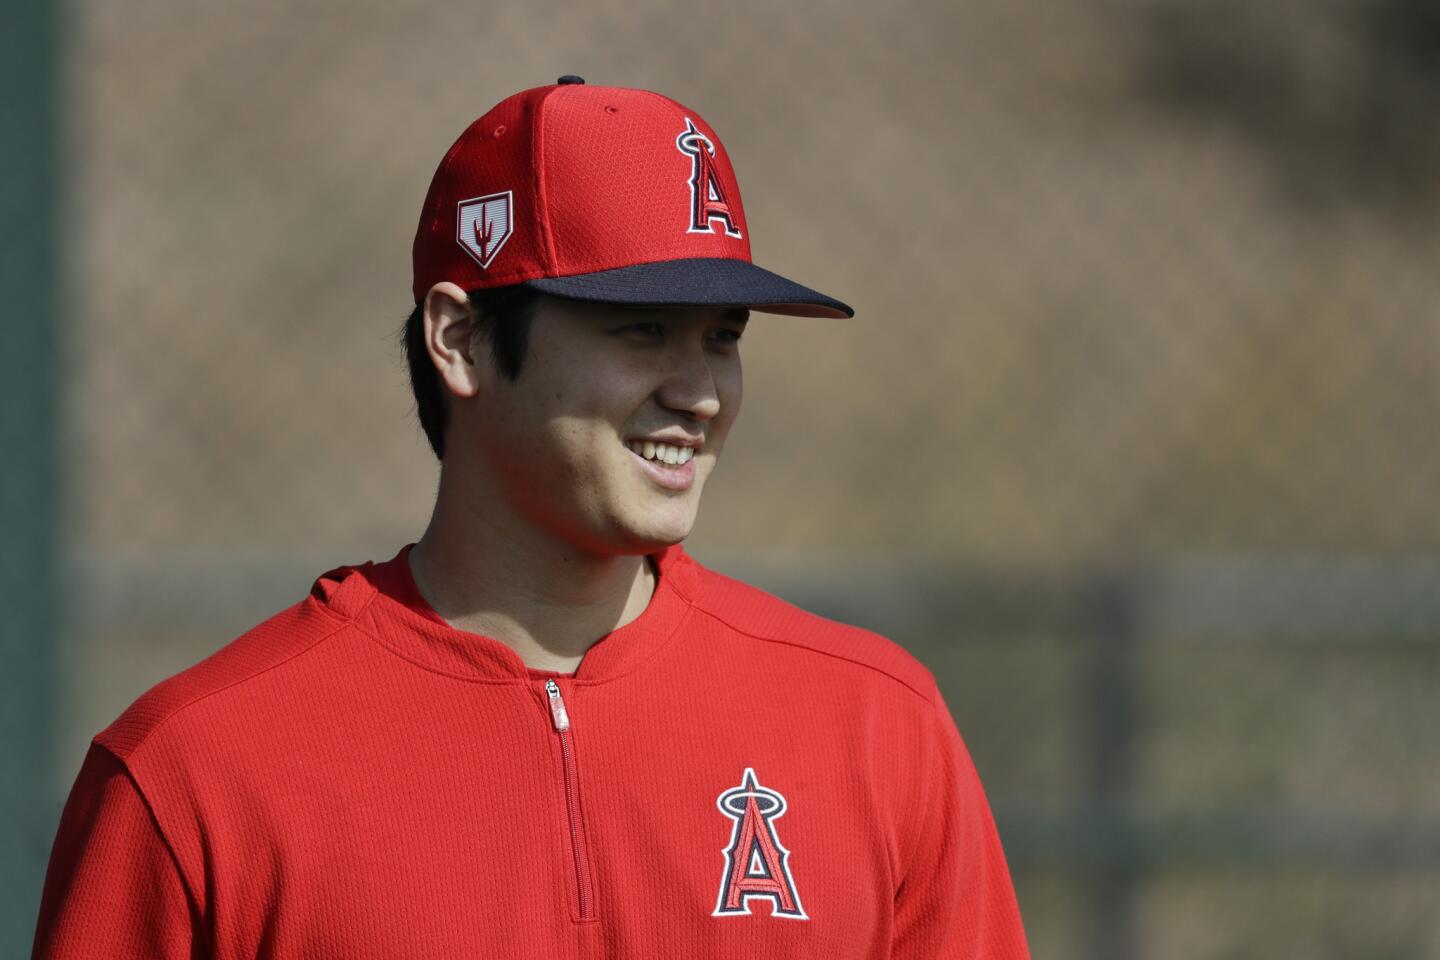 Los Angeles Angels' Shohei Ohtani, of Japan, walks on the practice field at their spring baseball training facility in Tempe, Ariz., Friday, Feb. 15, 2019. (AP Photo/Chris Carlson)